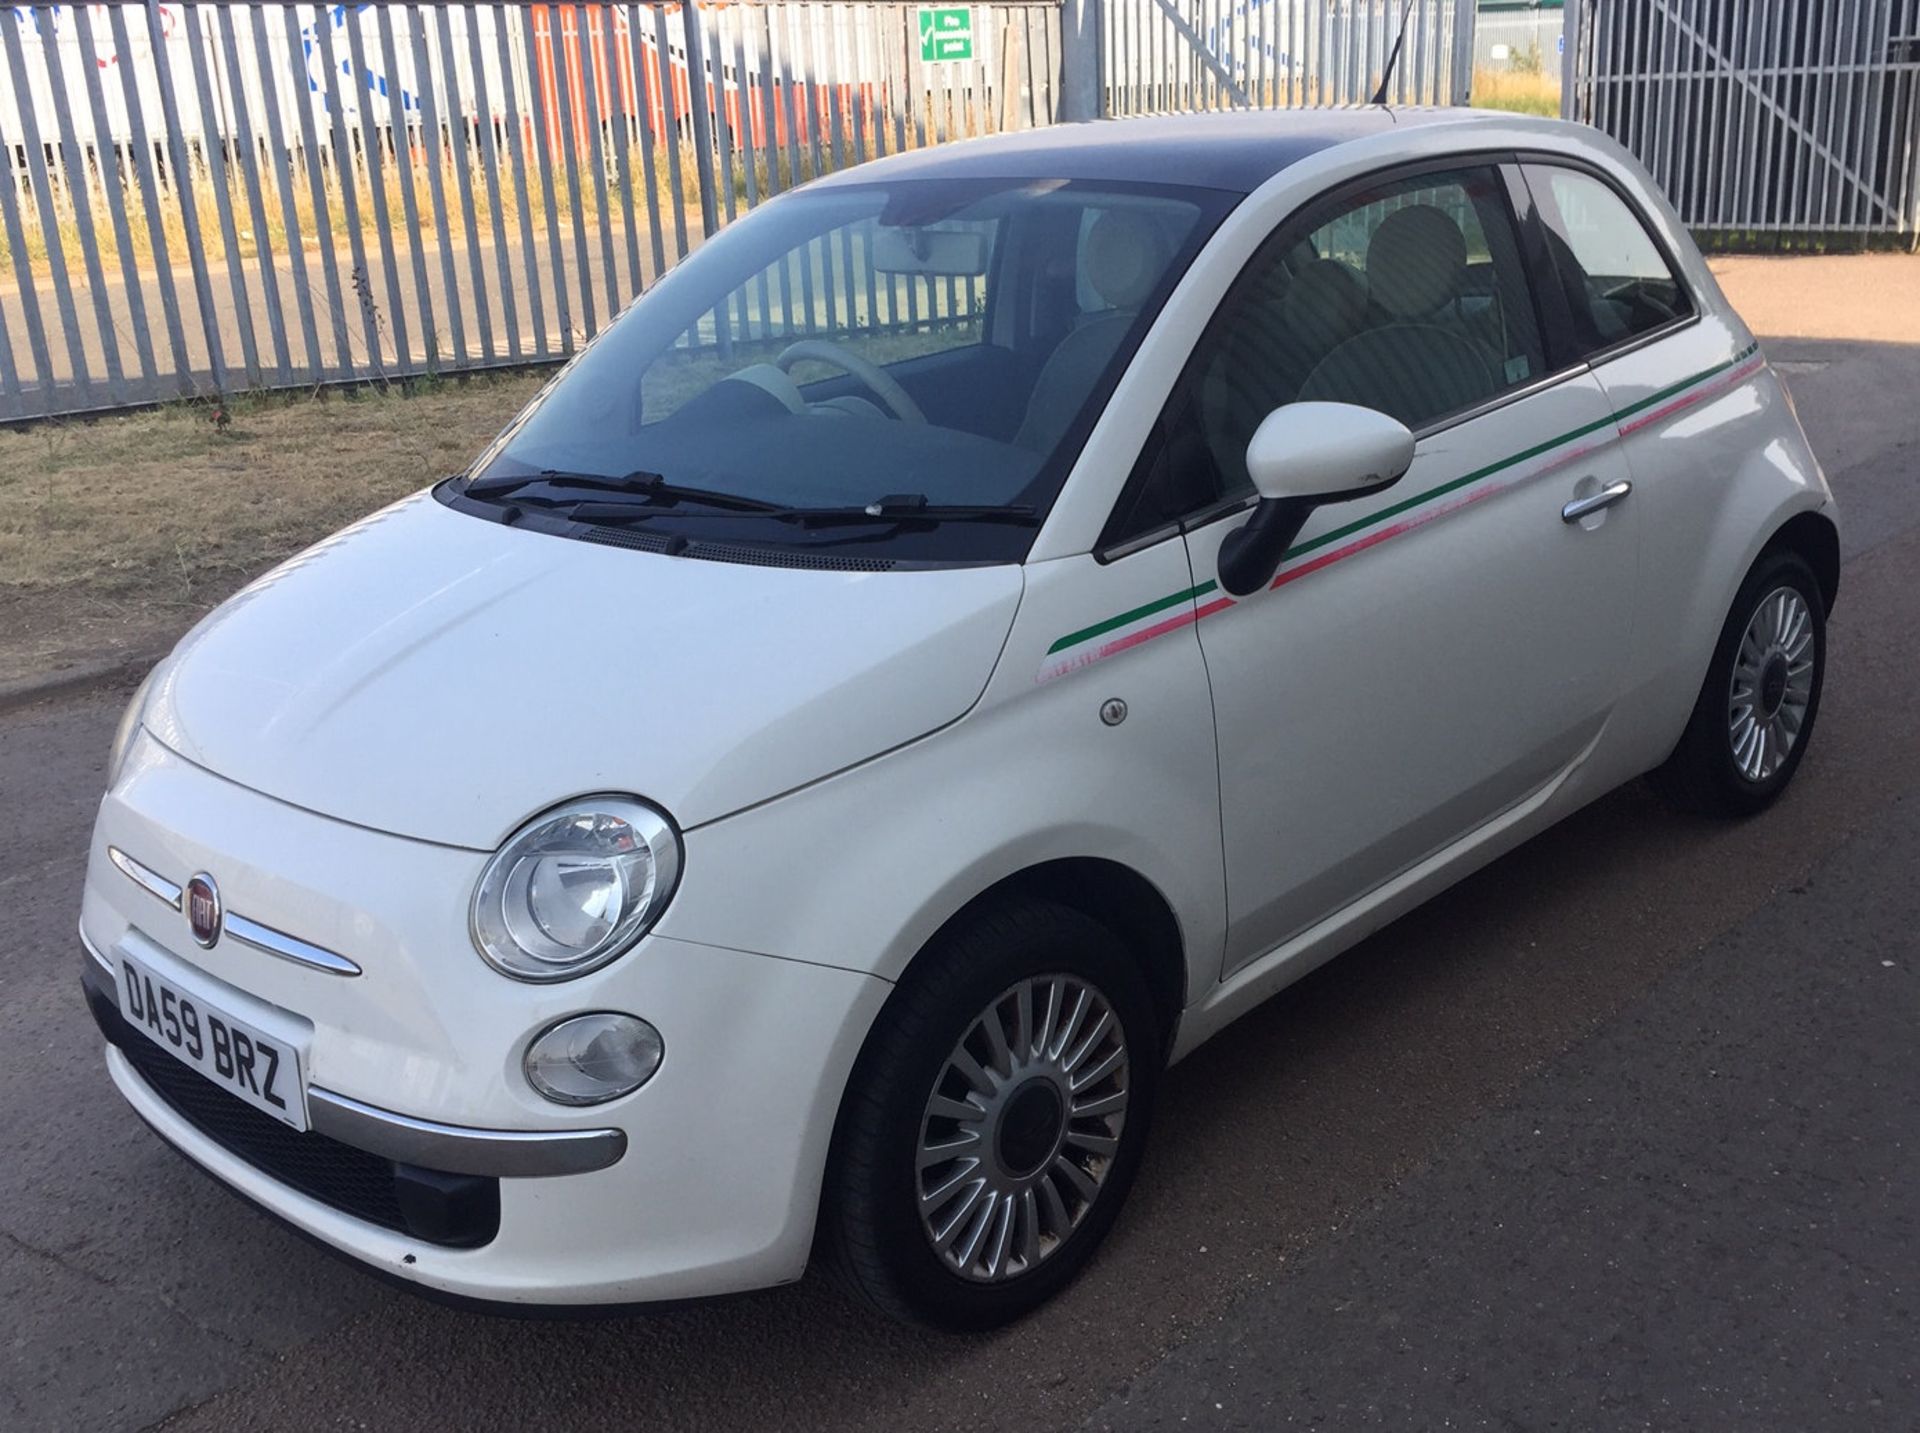 2009 Fiat 500 1.2 Lounge 3 Dr Hatchback - CL505 - NO VAT ON THE HAMMER - Location: Corby, Northampto - Image 12 of 12